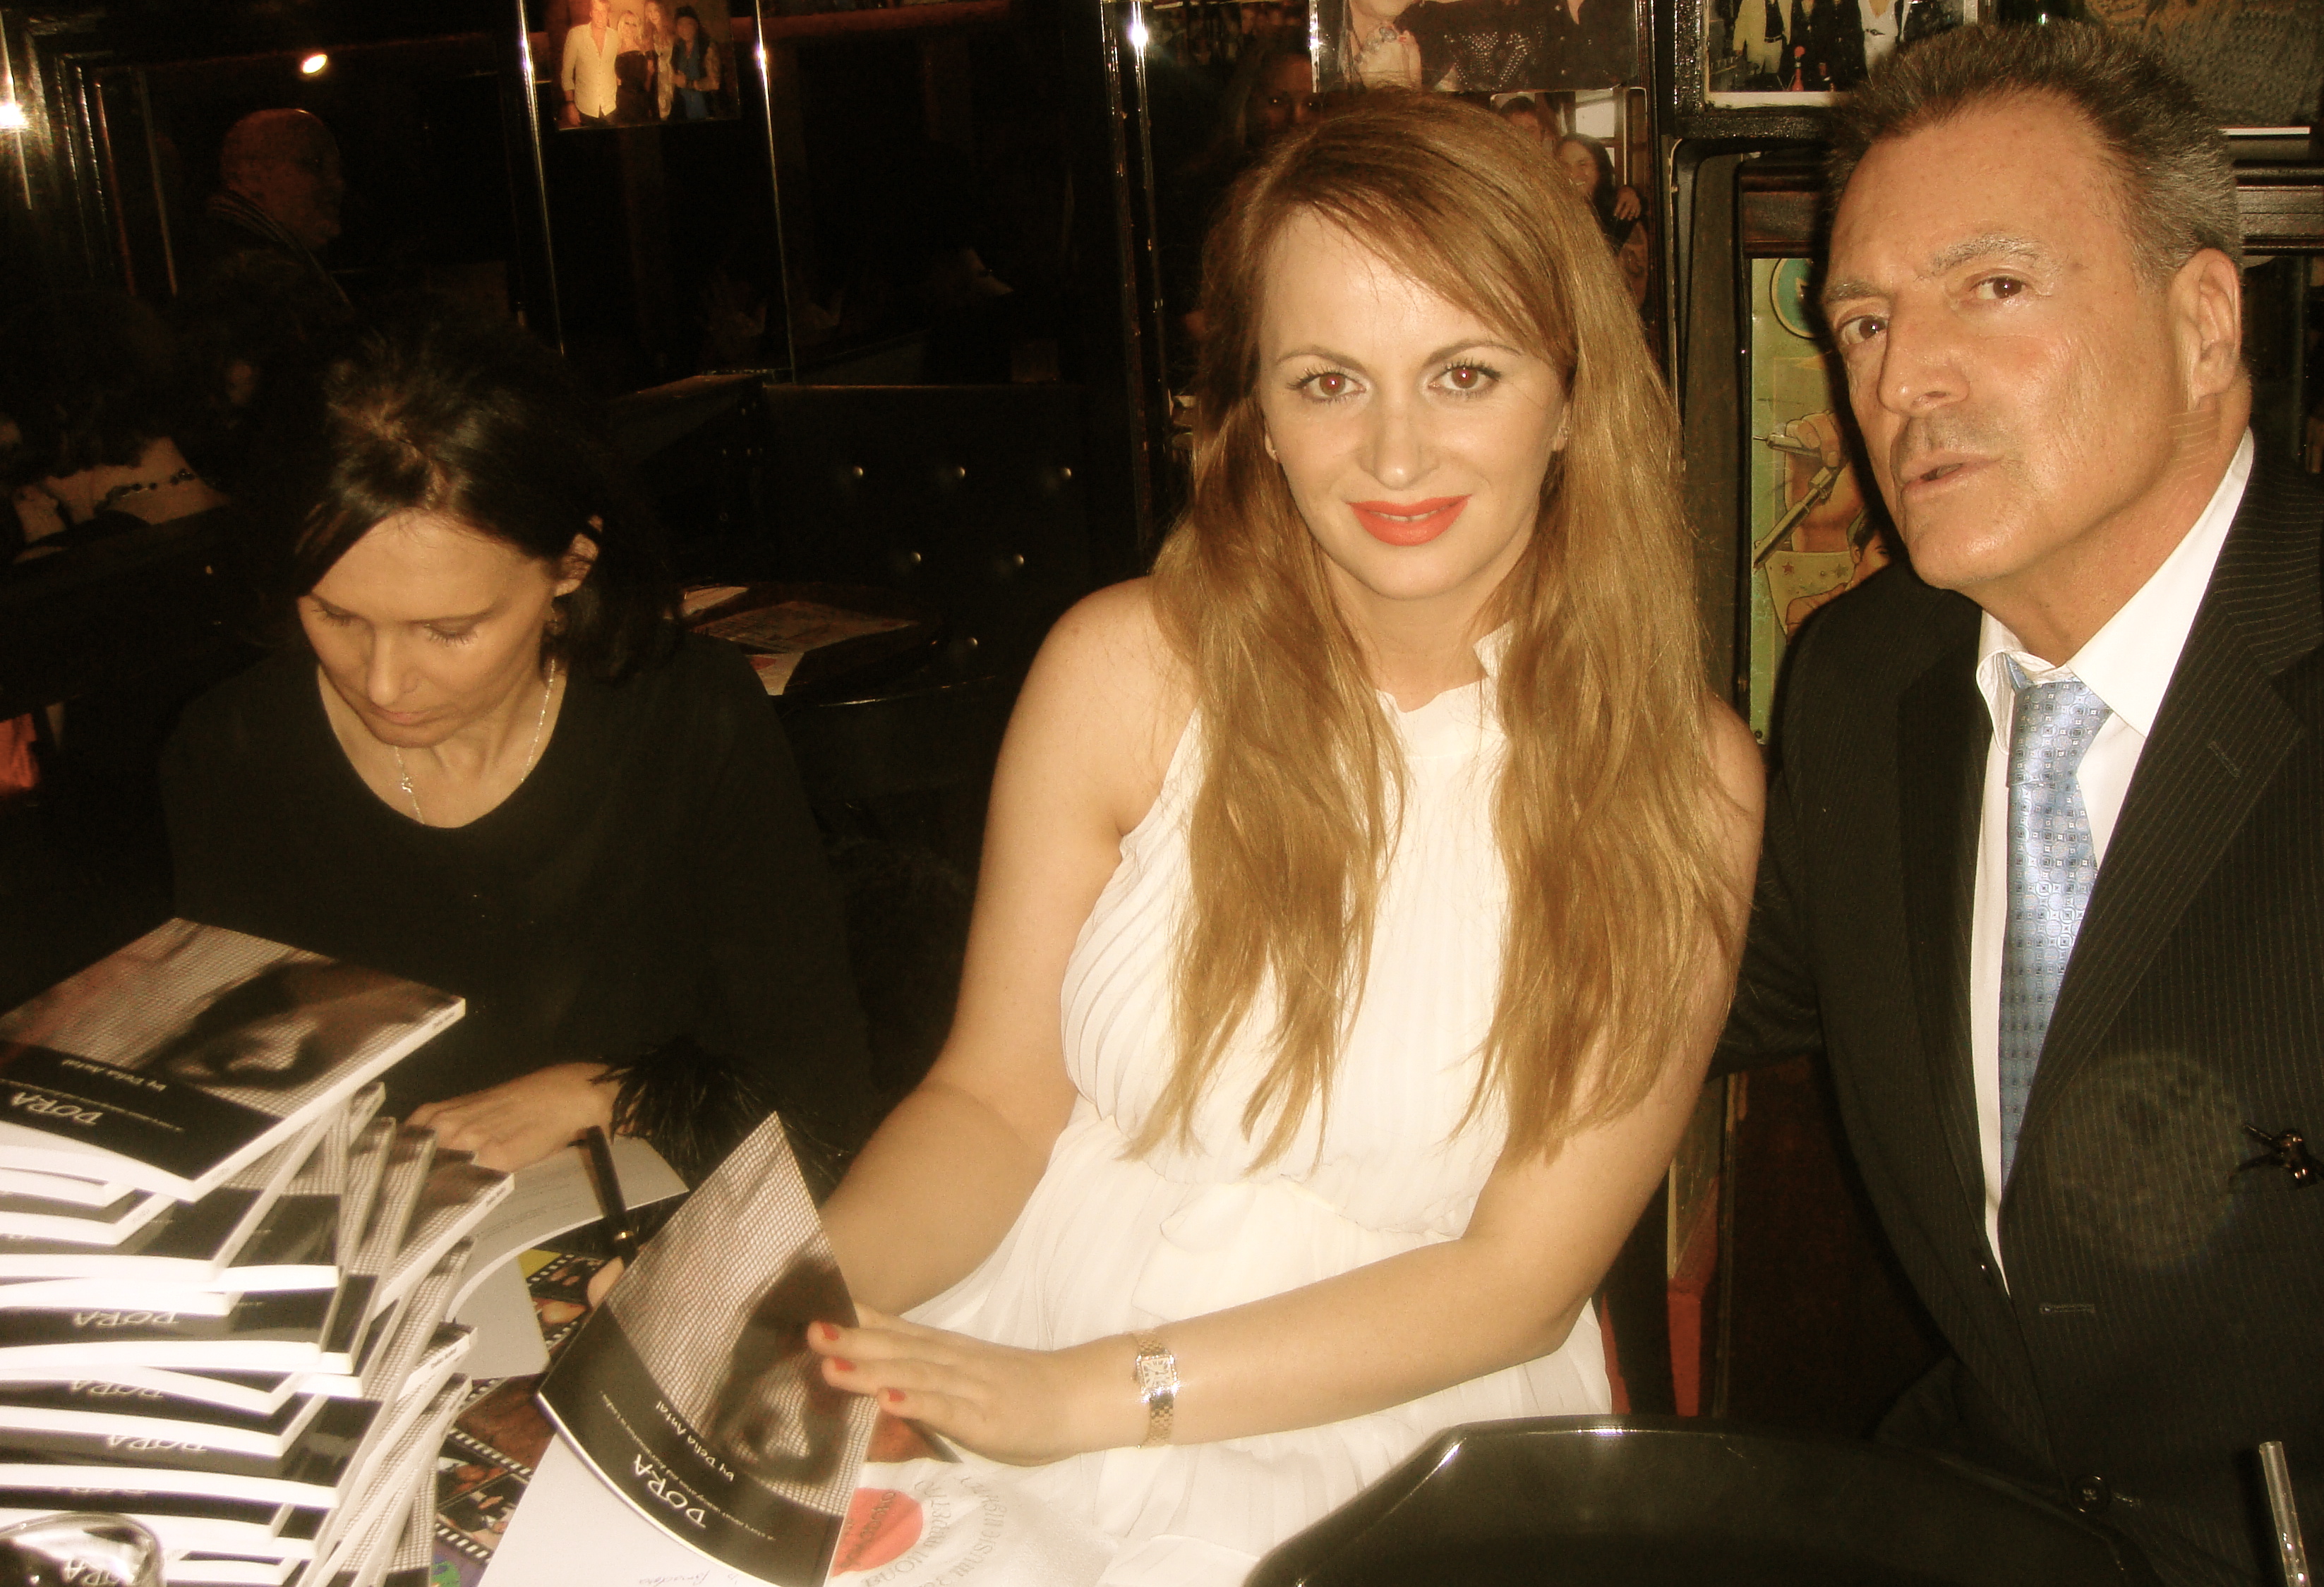 Delia Antal & Armand Assante DORA by Delia Antal, book signing at Ciro Pomodoro Fundraising for the children in Pakistan. 31st of January 2011